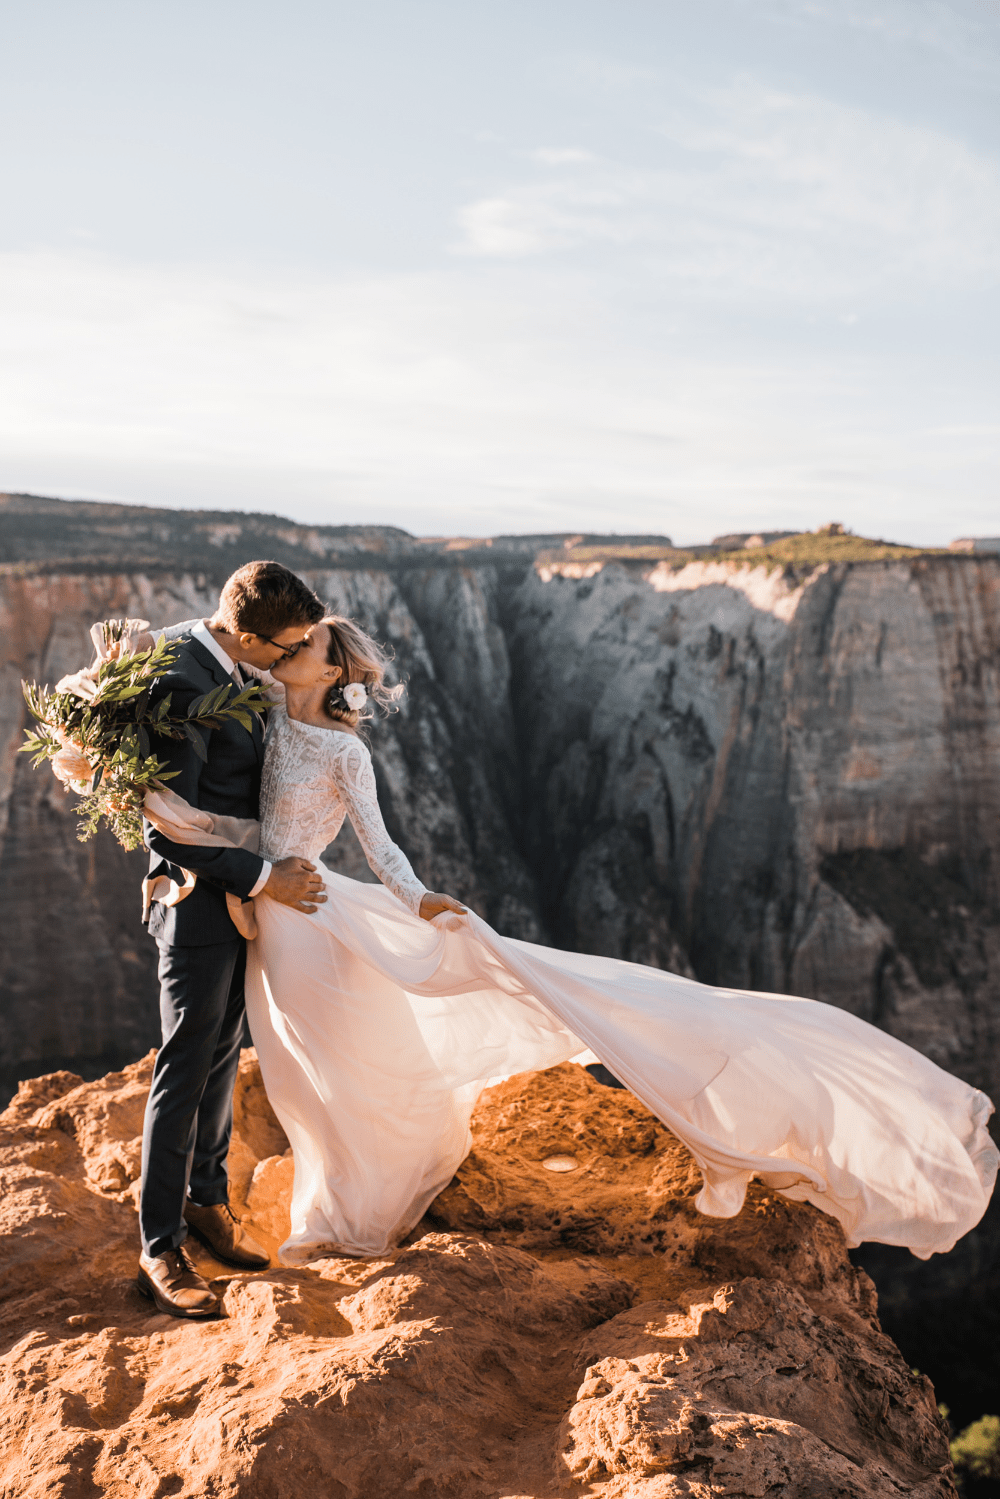 Couple kissing during their wedding on a cliff